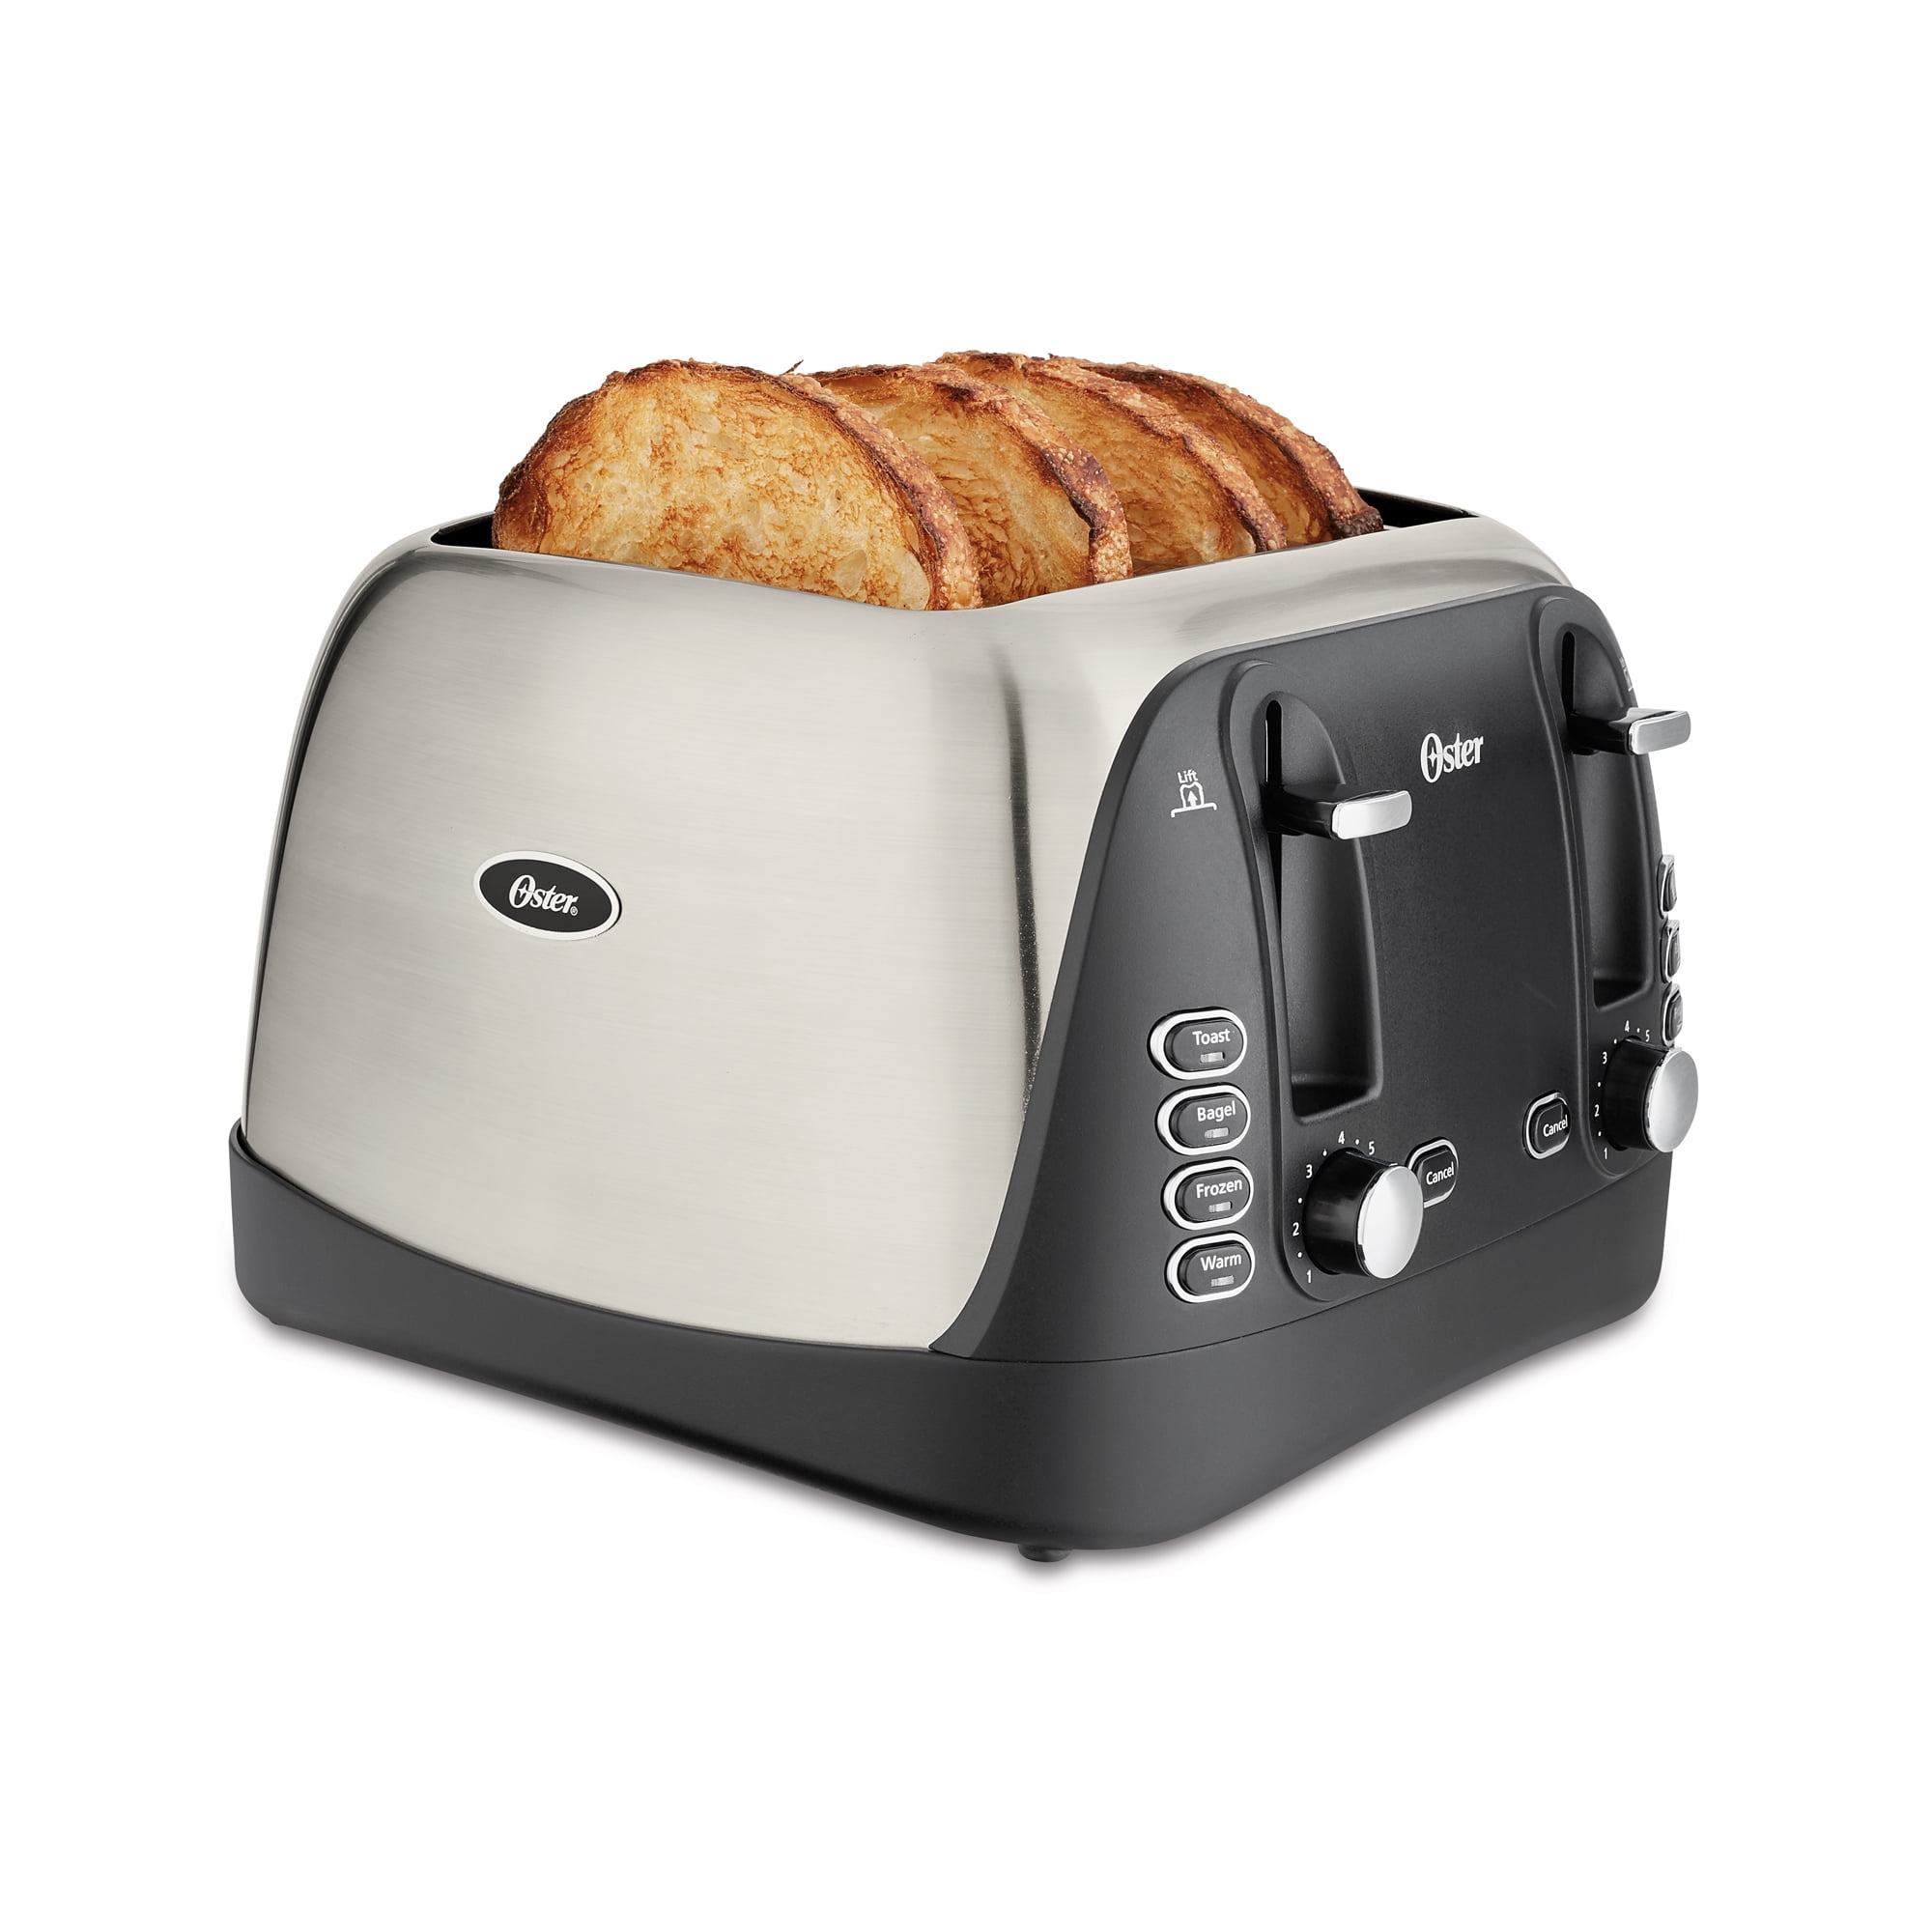 Oster 4-Slice Brushed Stainless Steel Toaster - Walmart.com Oster 4 Slice Stainless Steel Toaster